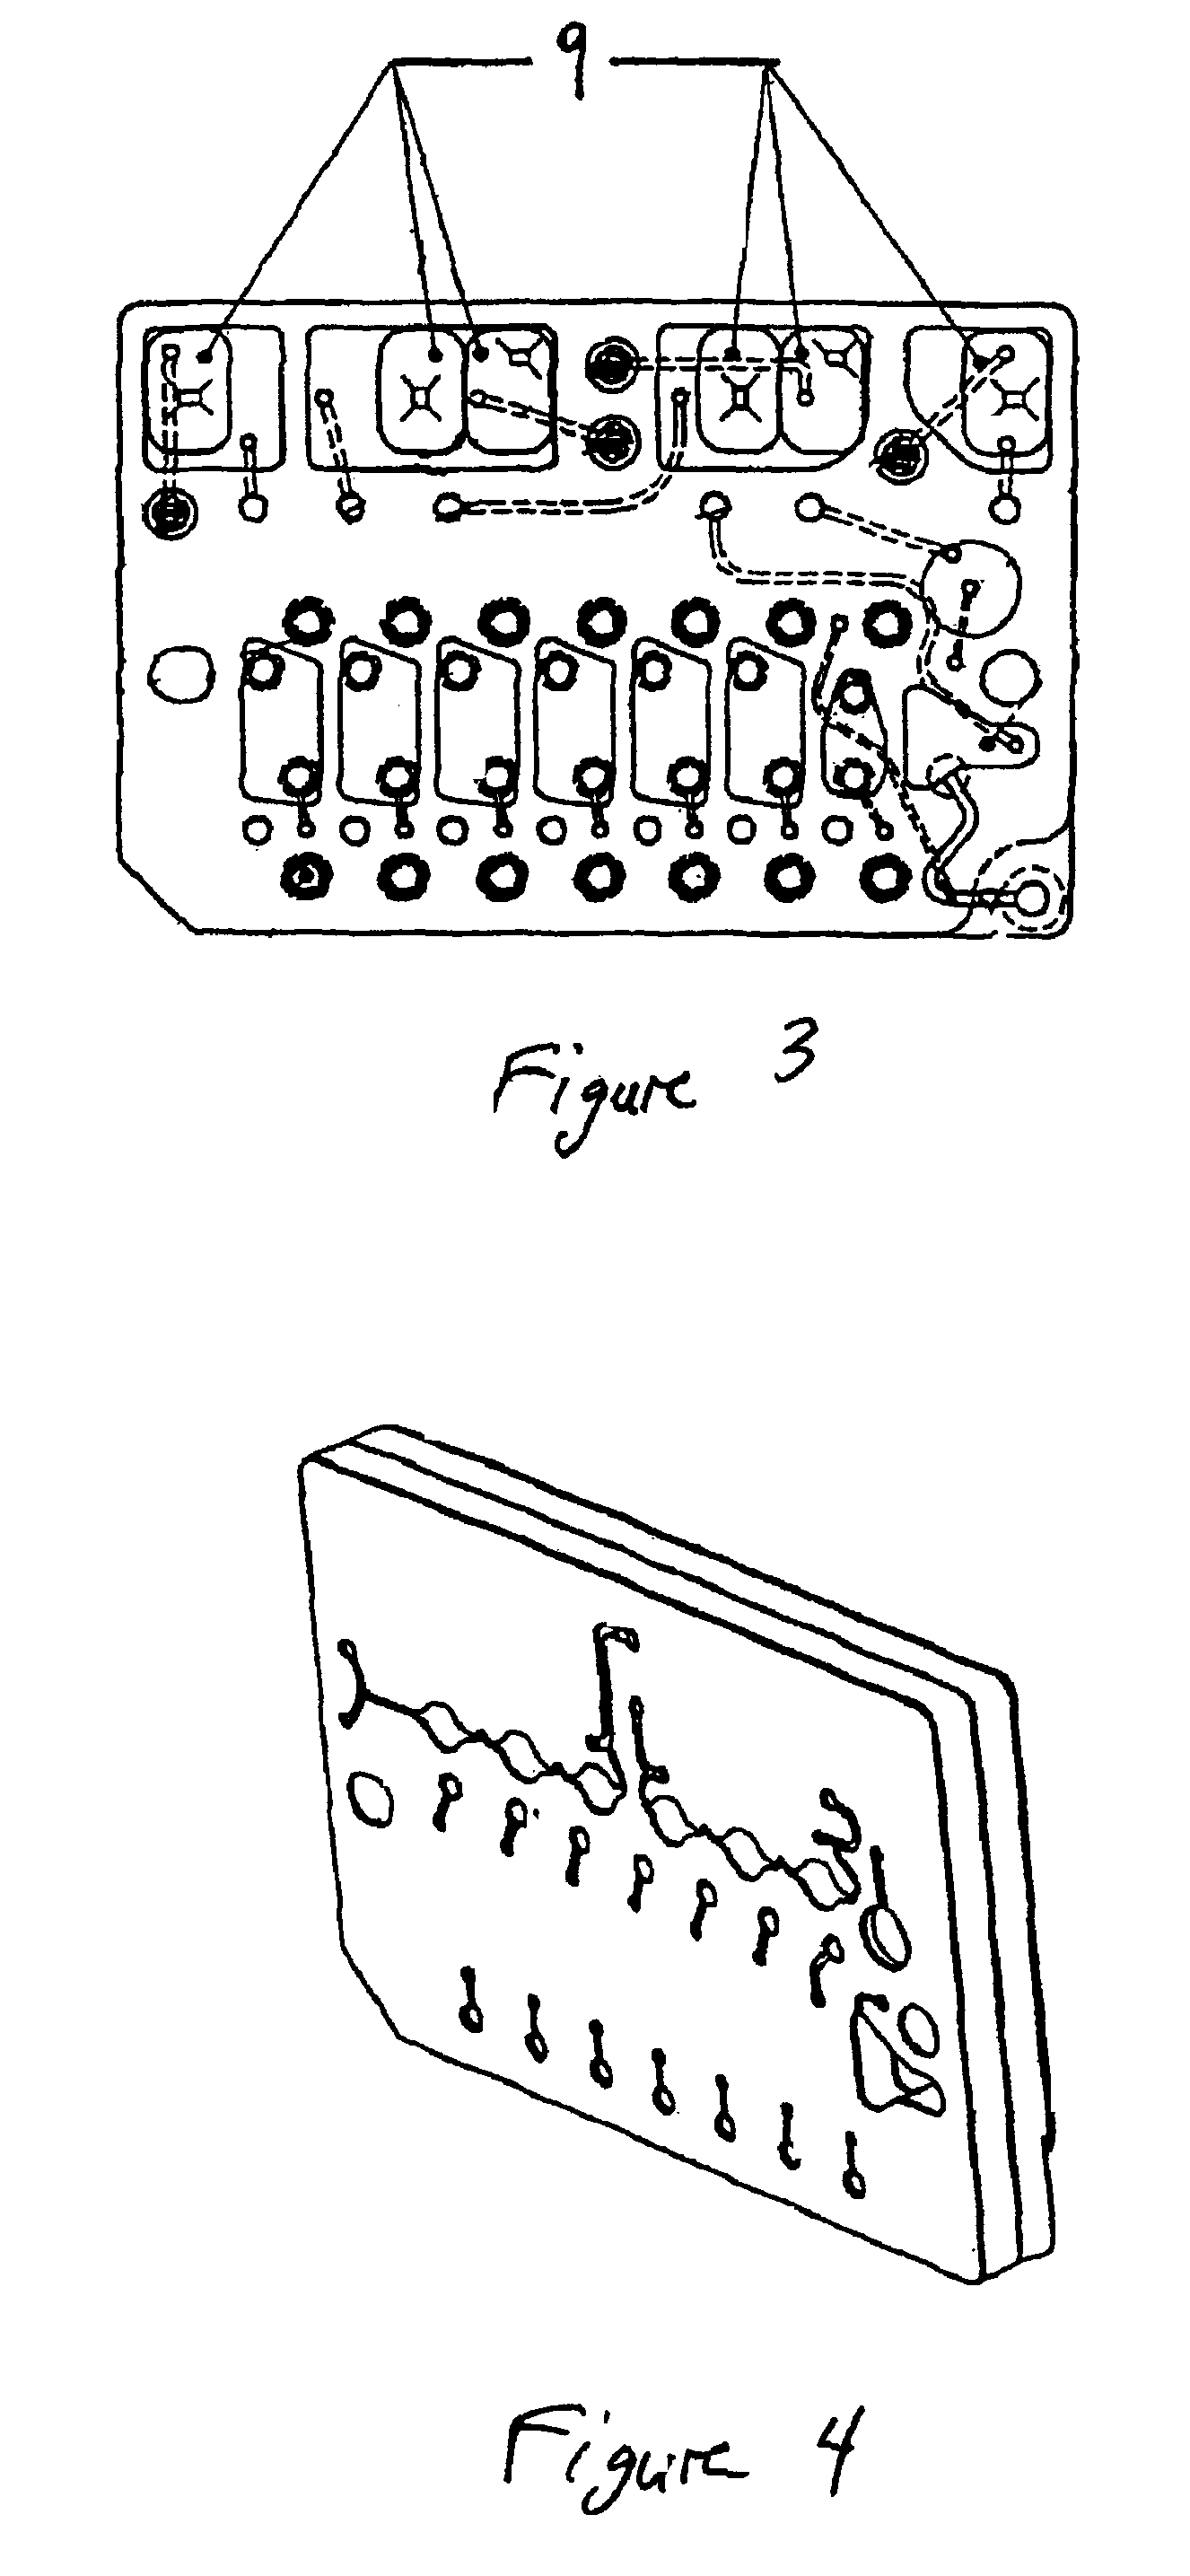 Reducing optical interference in a fluidic device